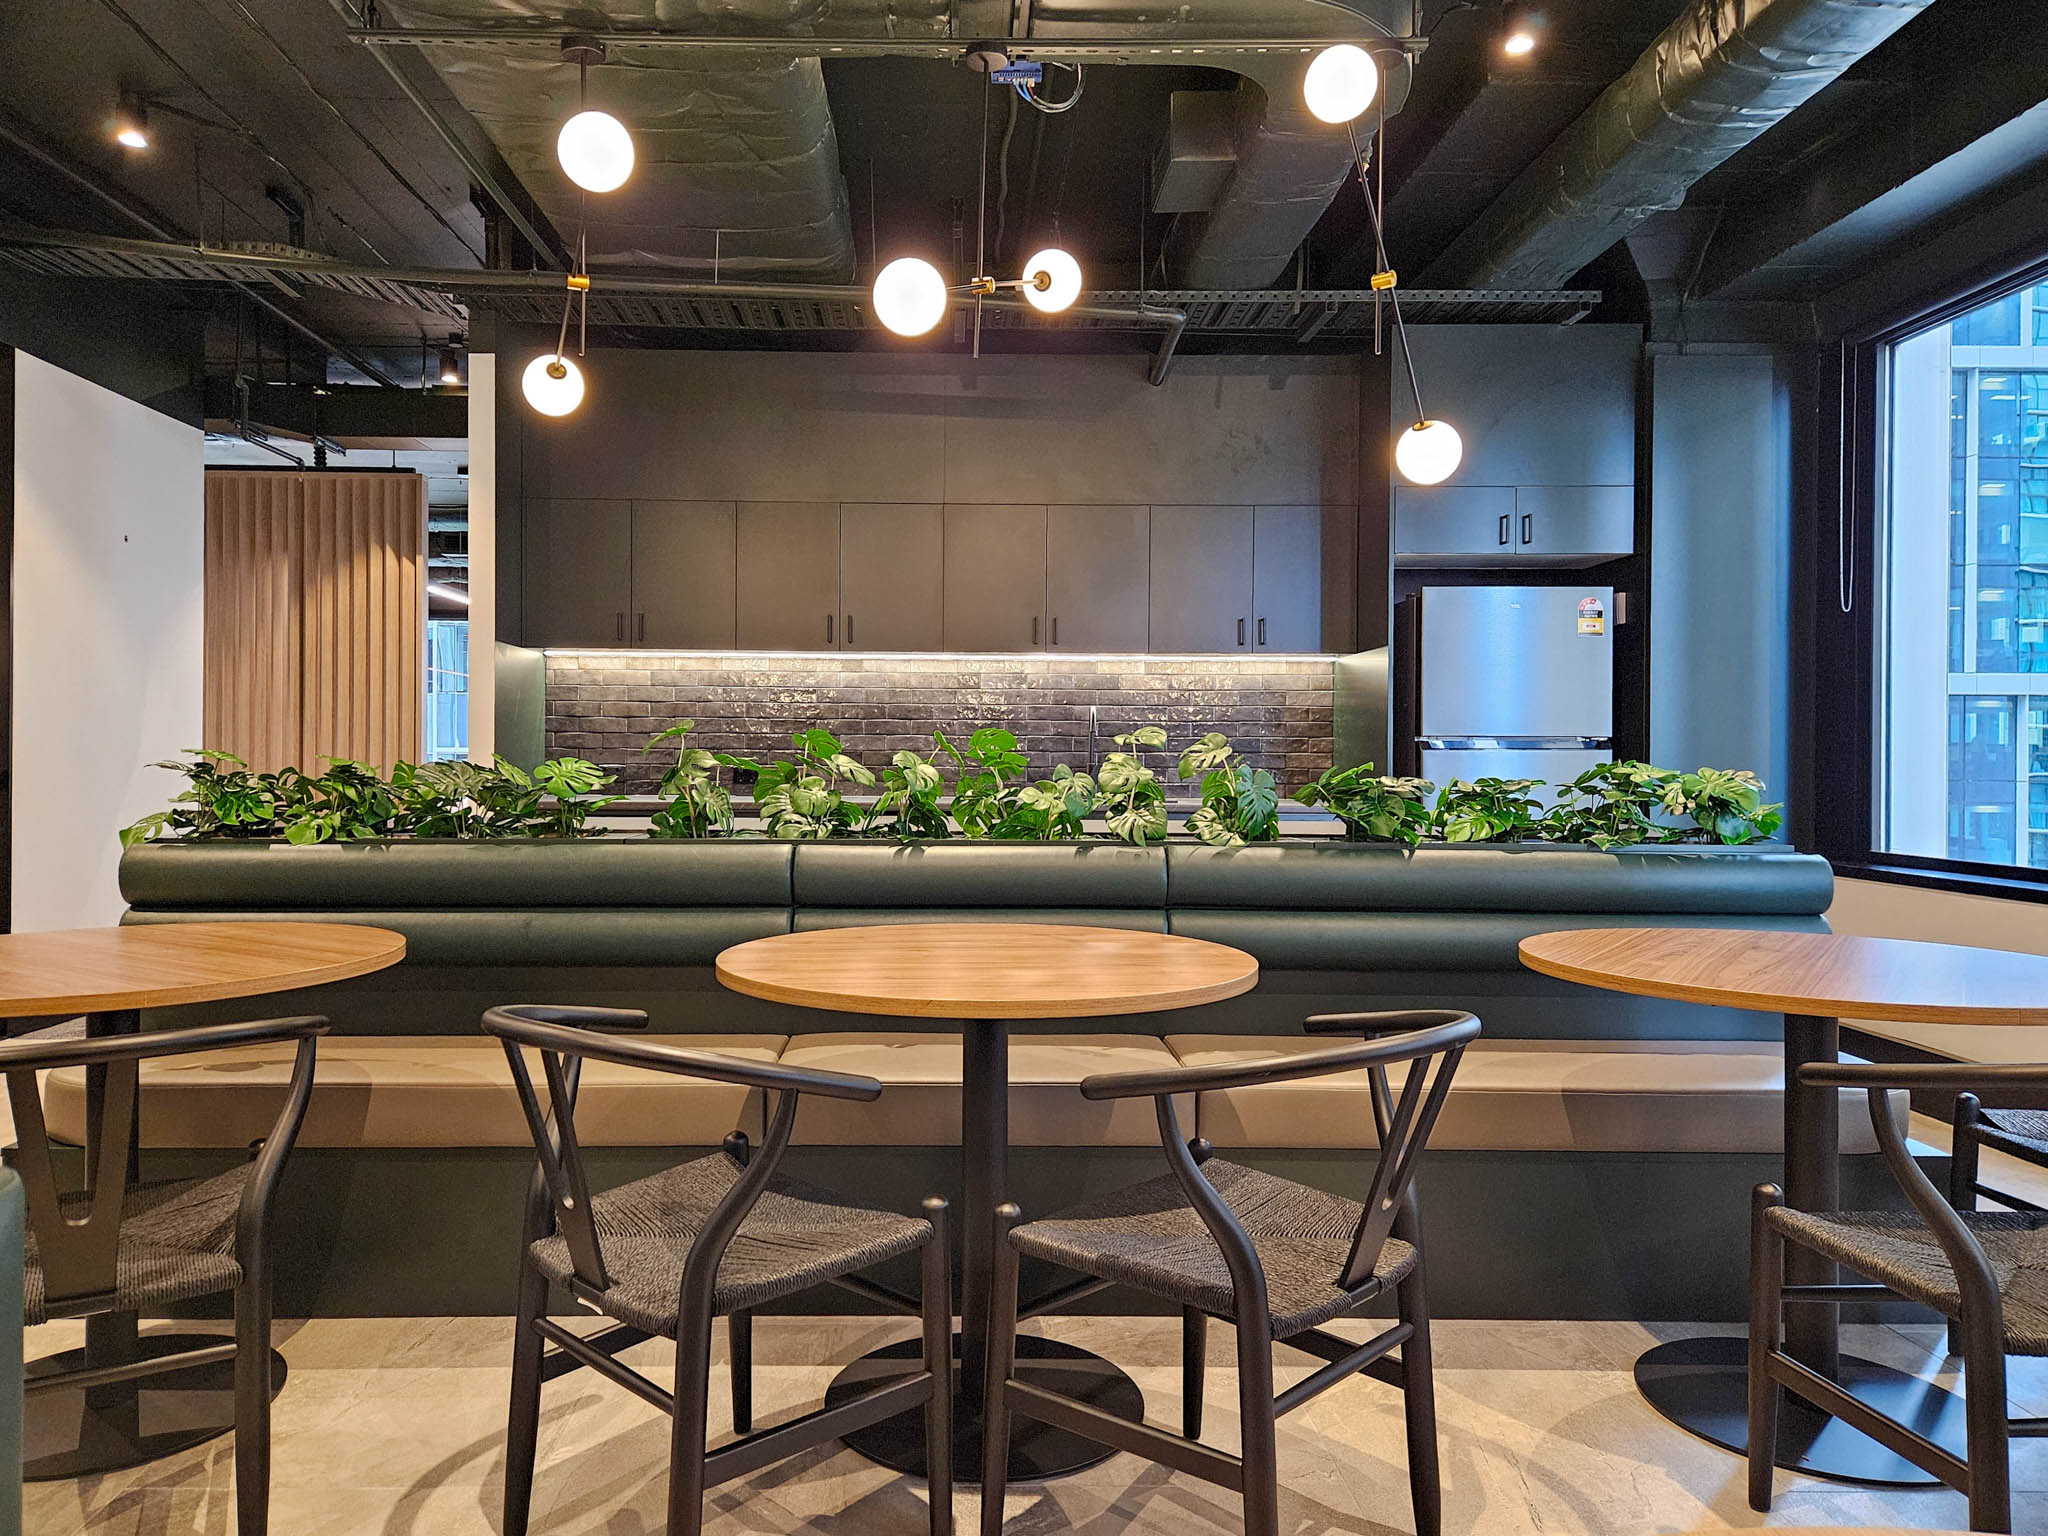 Office kitchen with tables, chairs, and plants